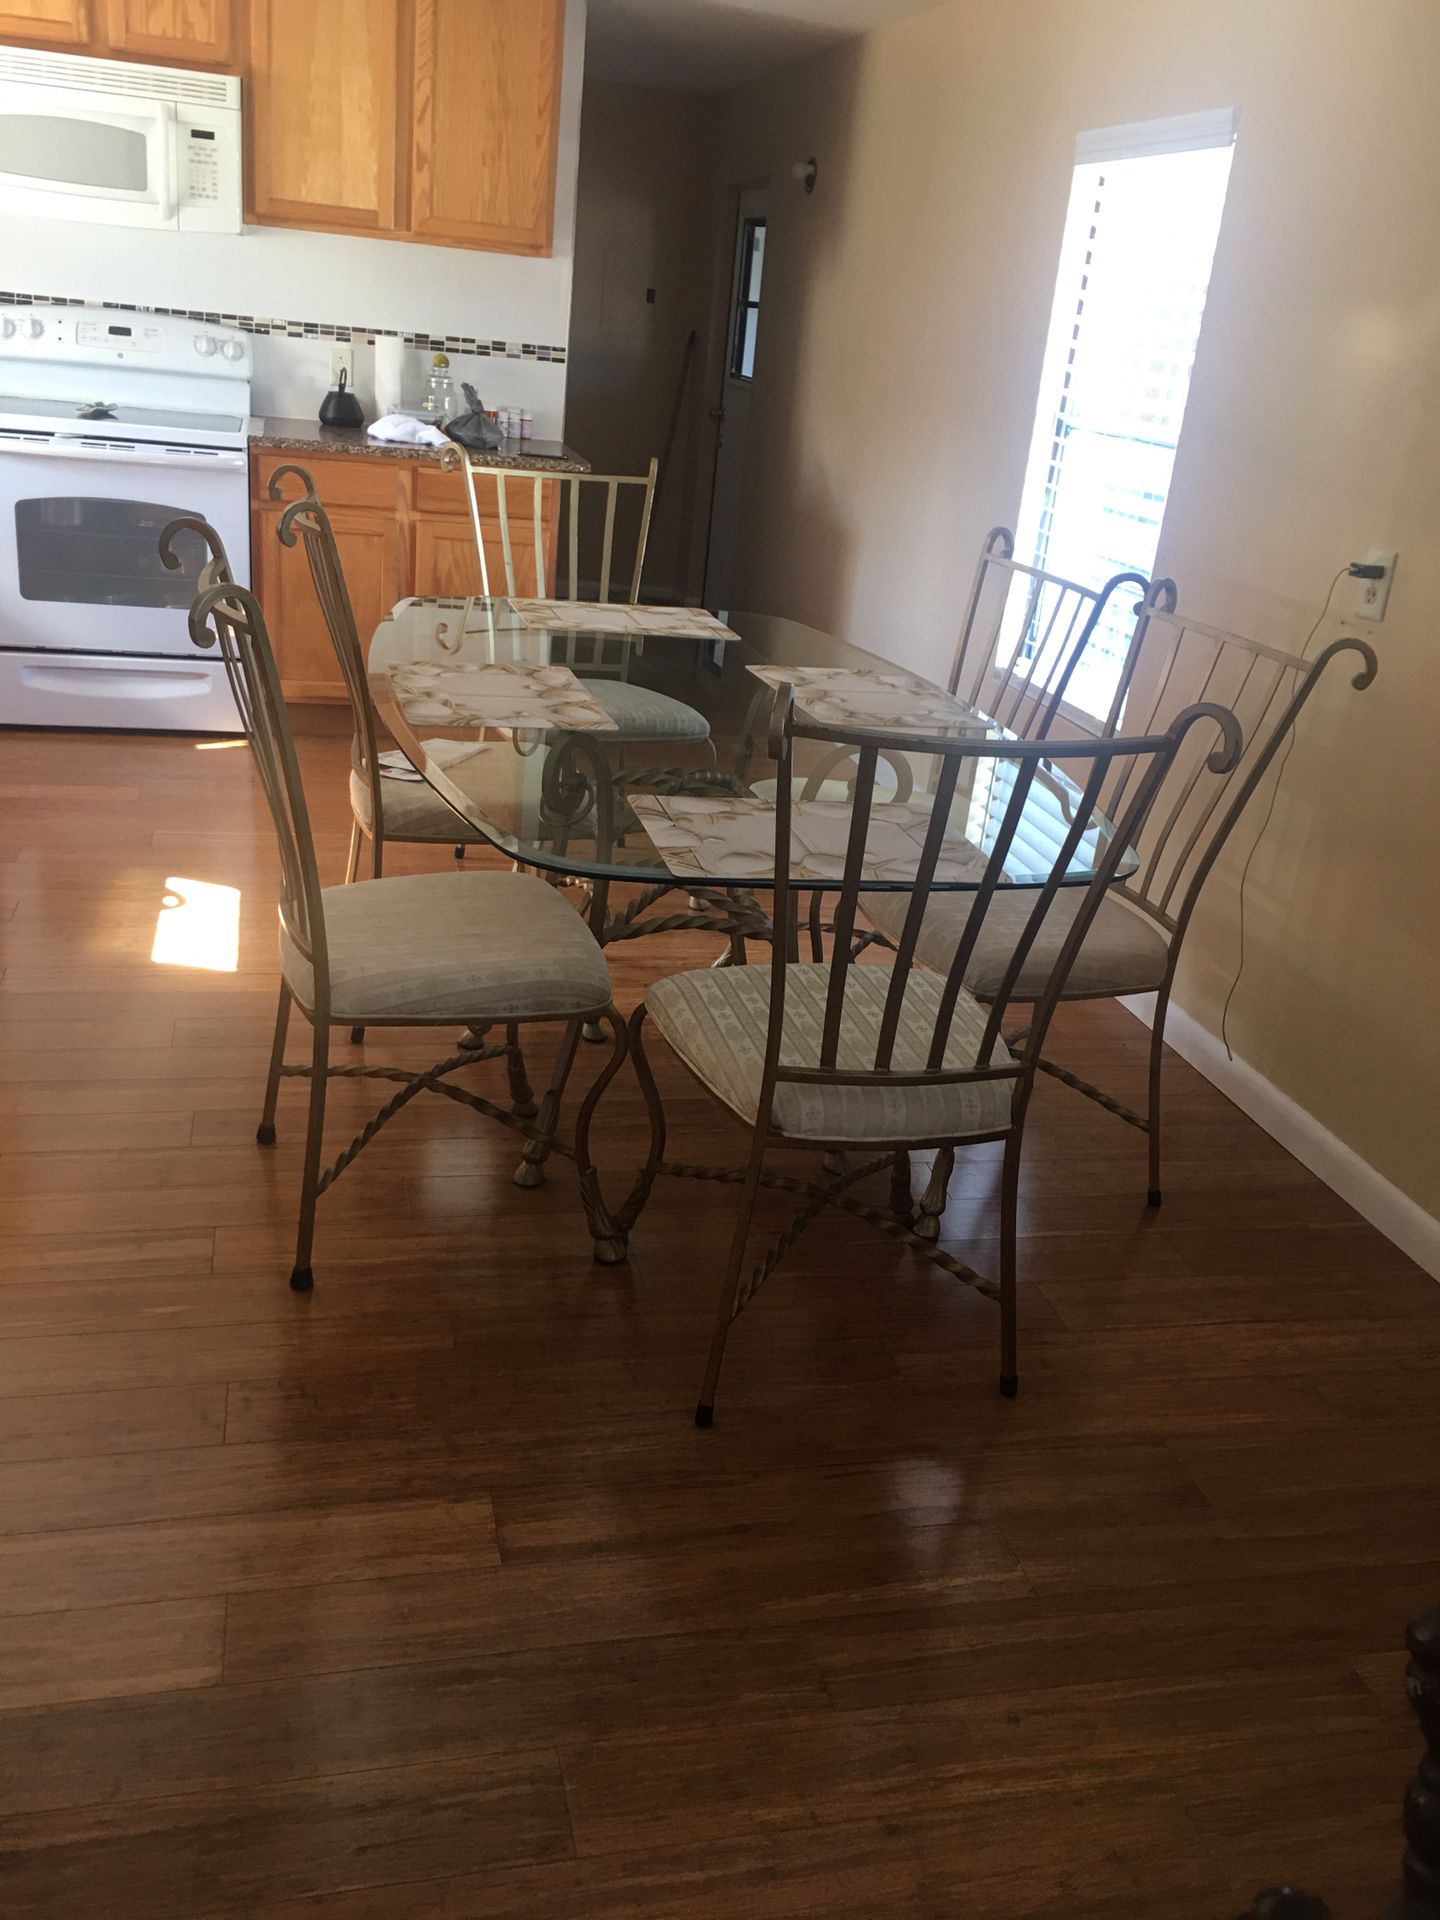 Dinning table. 6 padding chairs